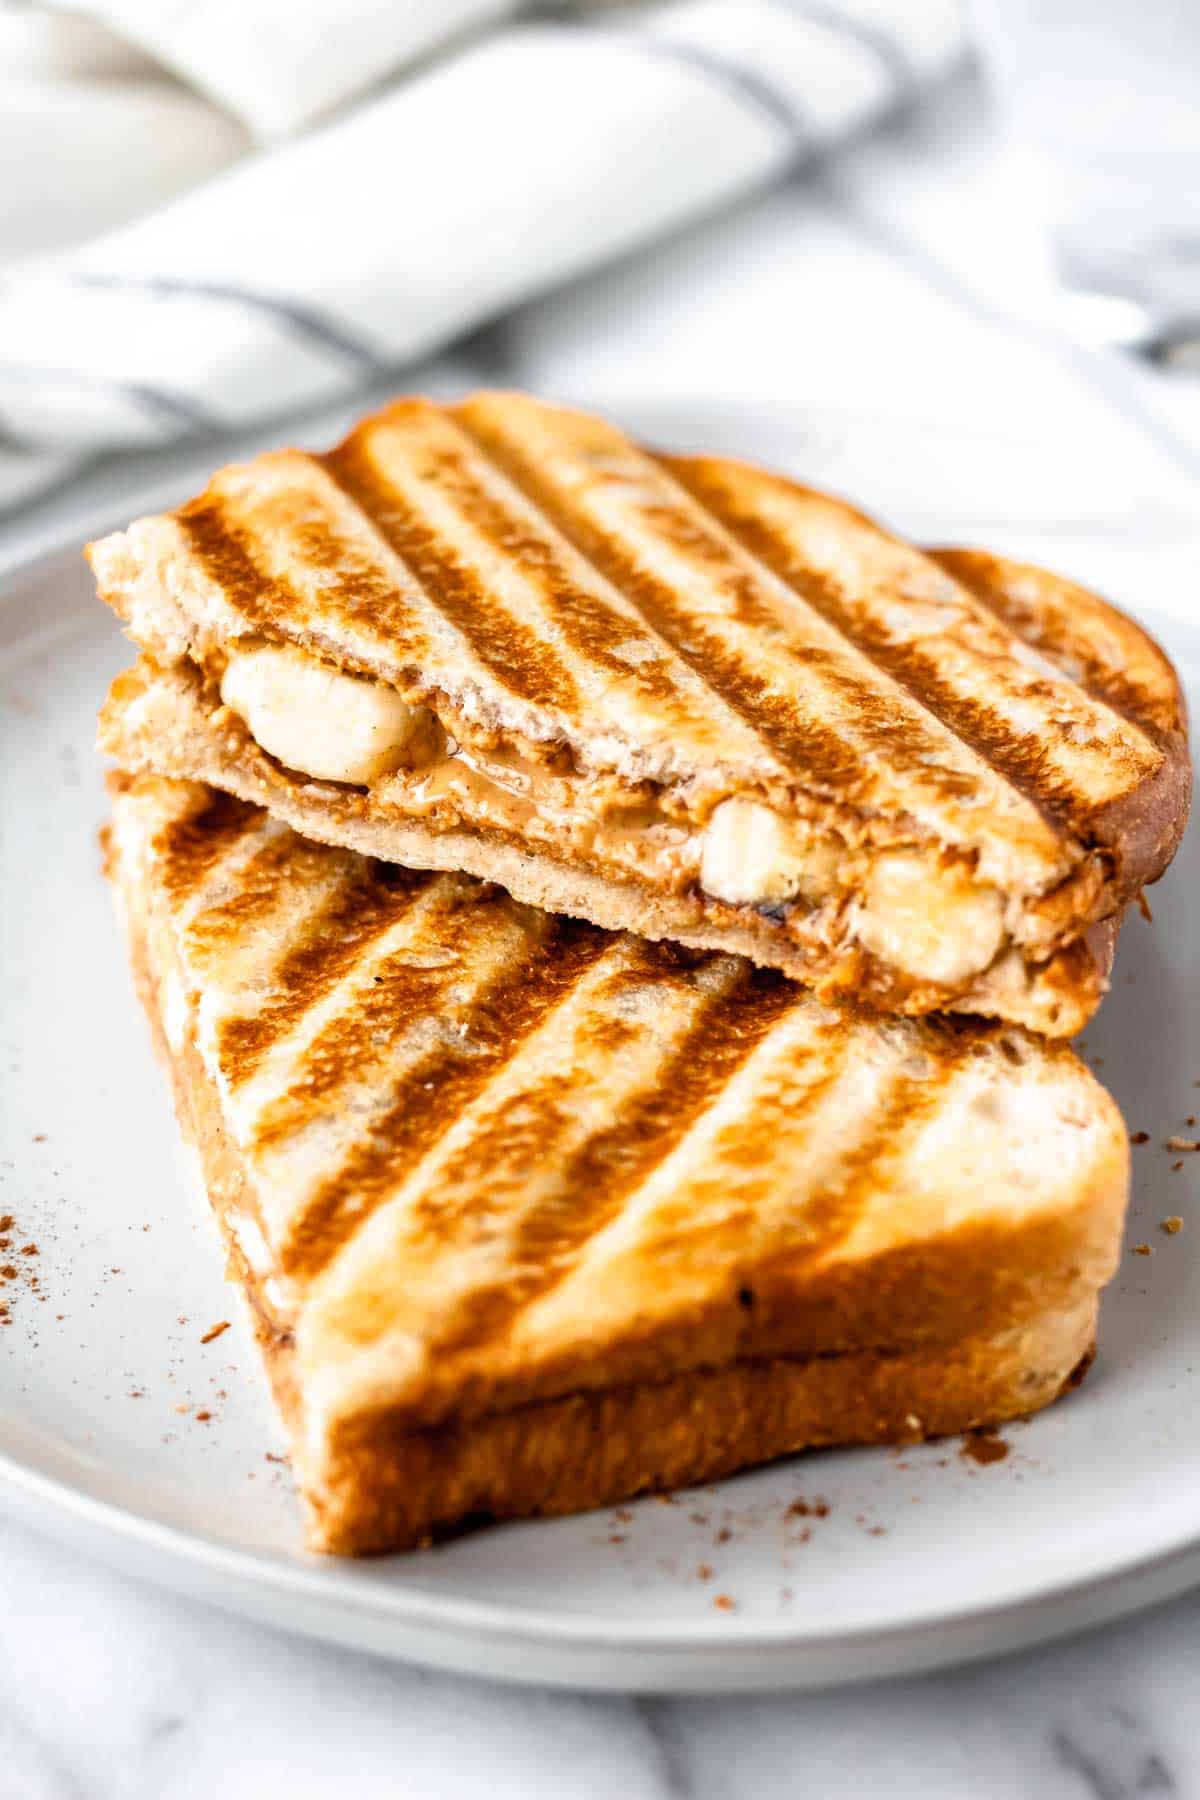 A fried peanut butter and banana sandwich on a white plate.